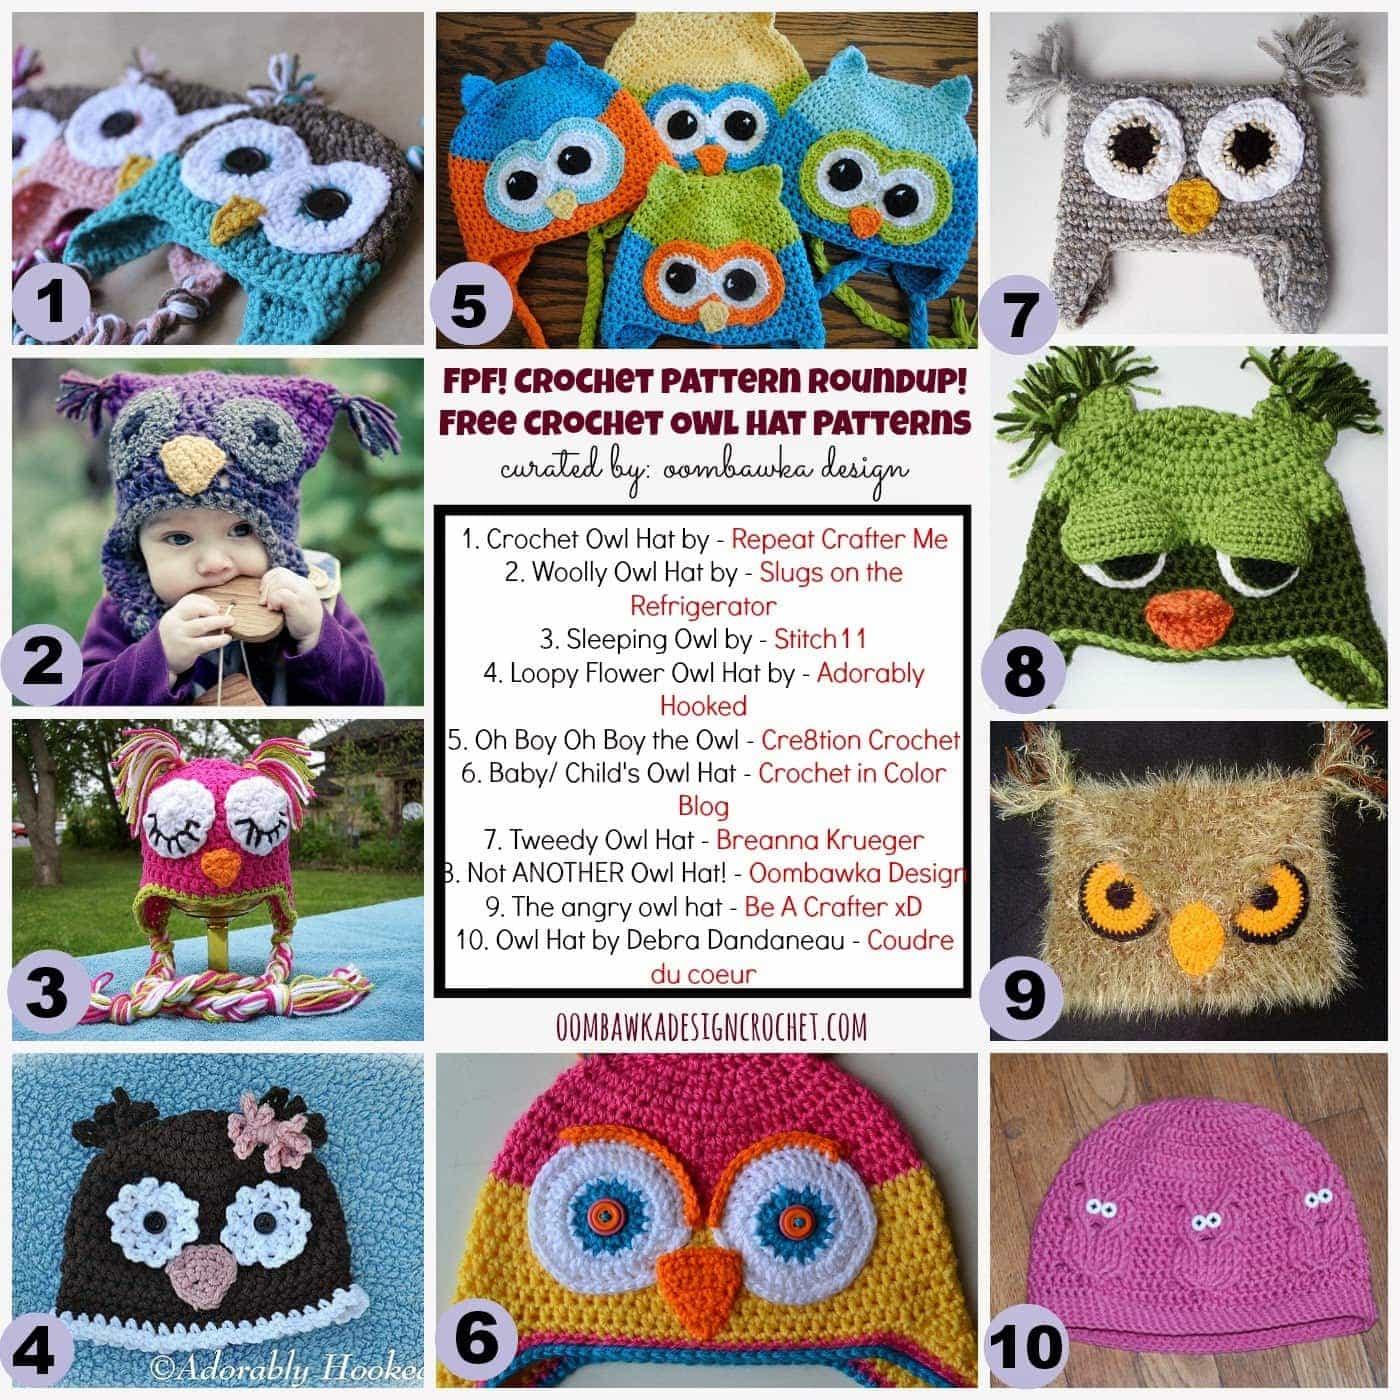 Repeat Crafter Me Crochet Owl Hat Pattern Time For Our Weekly Fpf Crochet Roundup Free Crochet Owl Hat